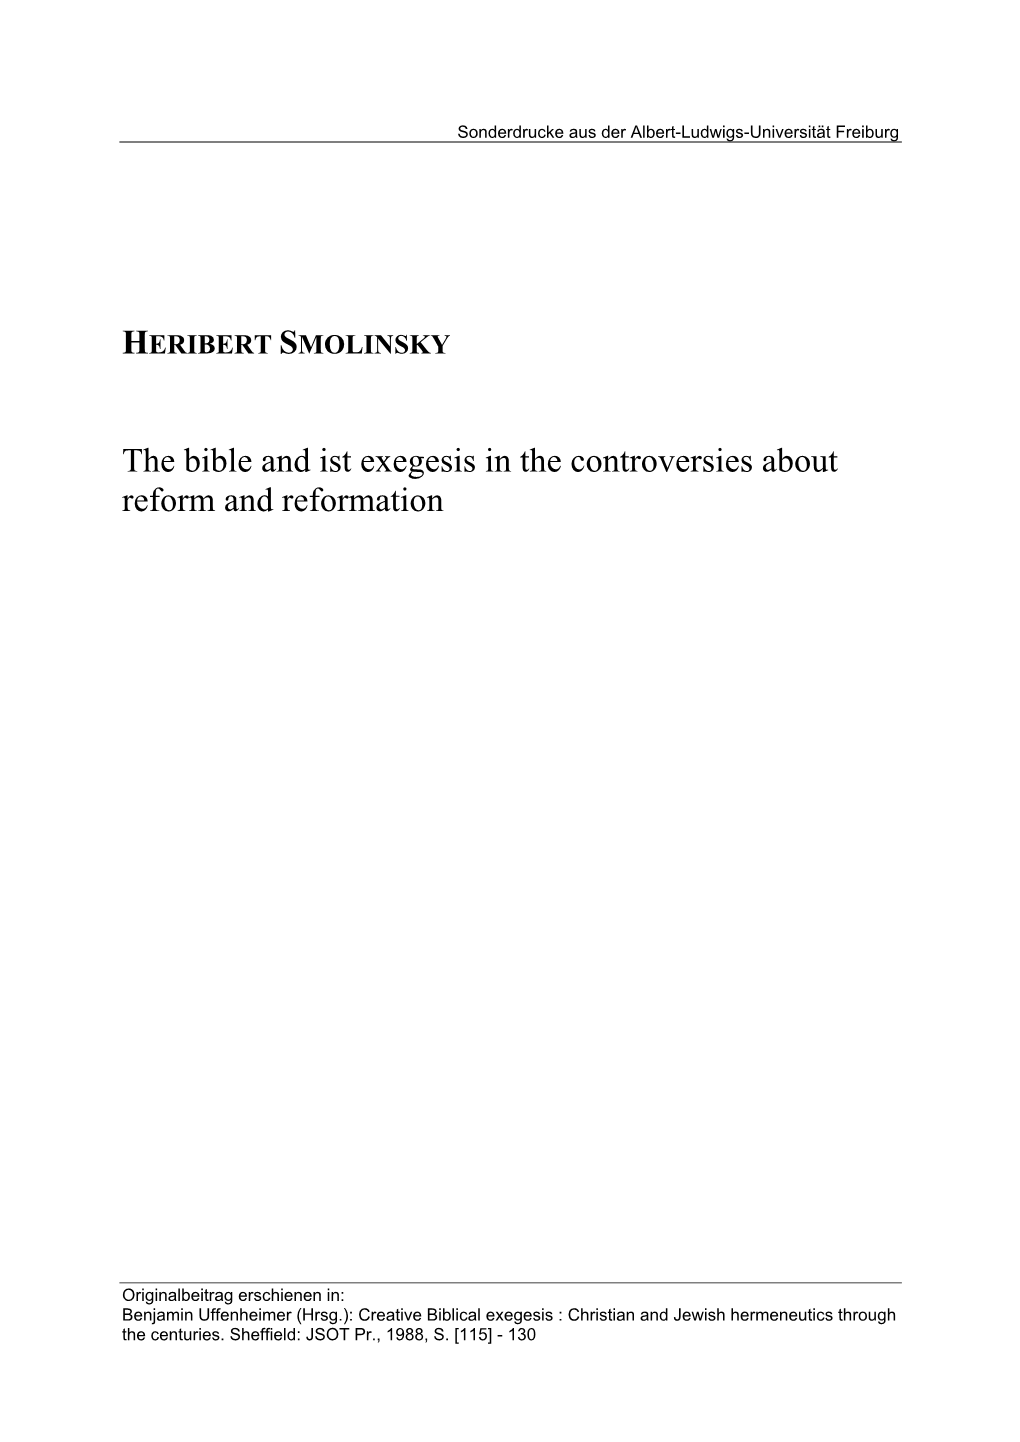 The Bible and Ist Exegesis in the Controversies About Reform and Reformation